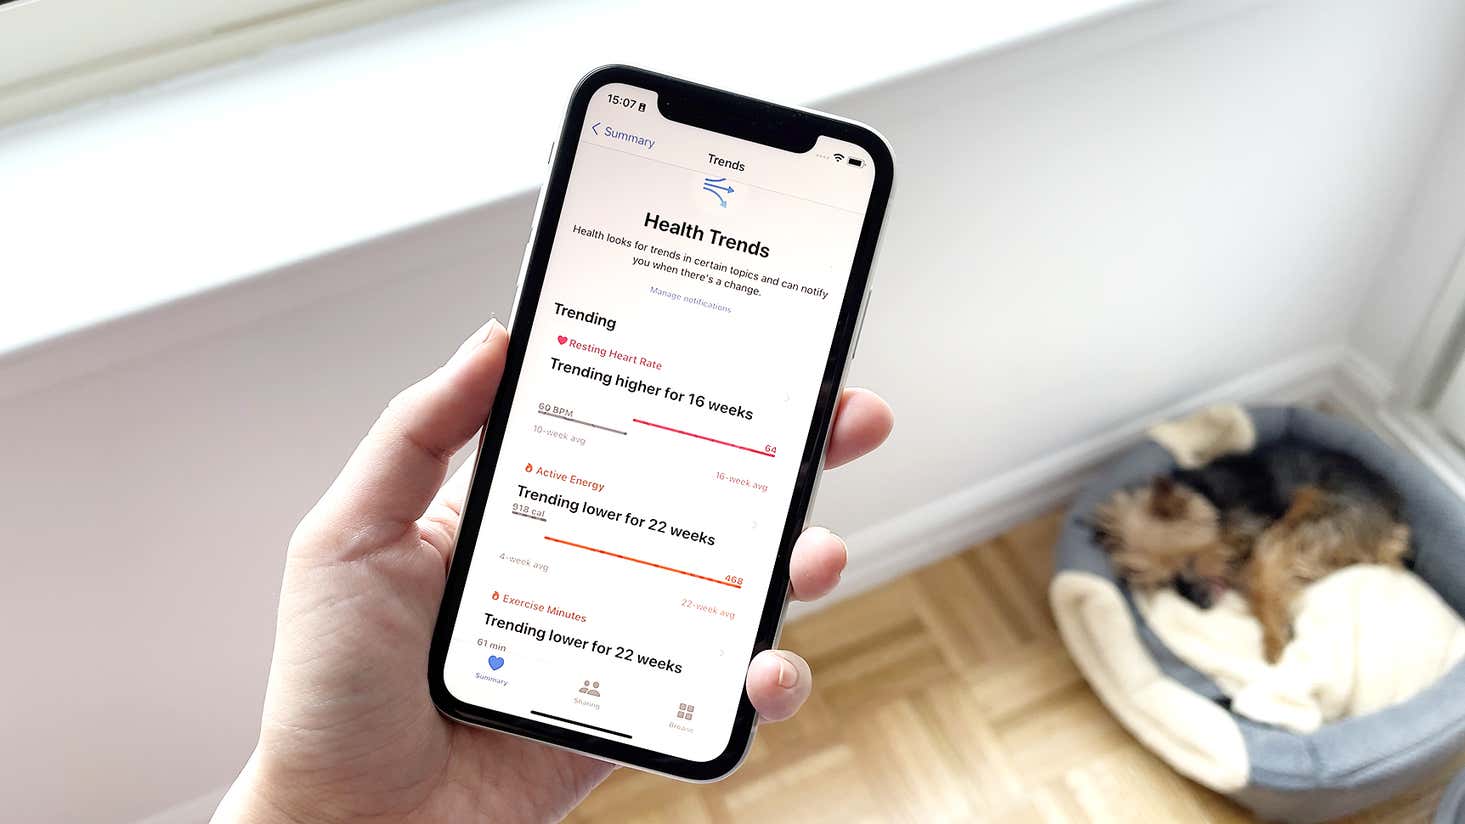 With iOS 15, Apple's introduced Health trends in its Health app. You can expect more features like this going forward, but that doesn't mean we'll see dystopian diagnoses from our gadgets. (Photo: Victoria Song/Gizmodo)